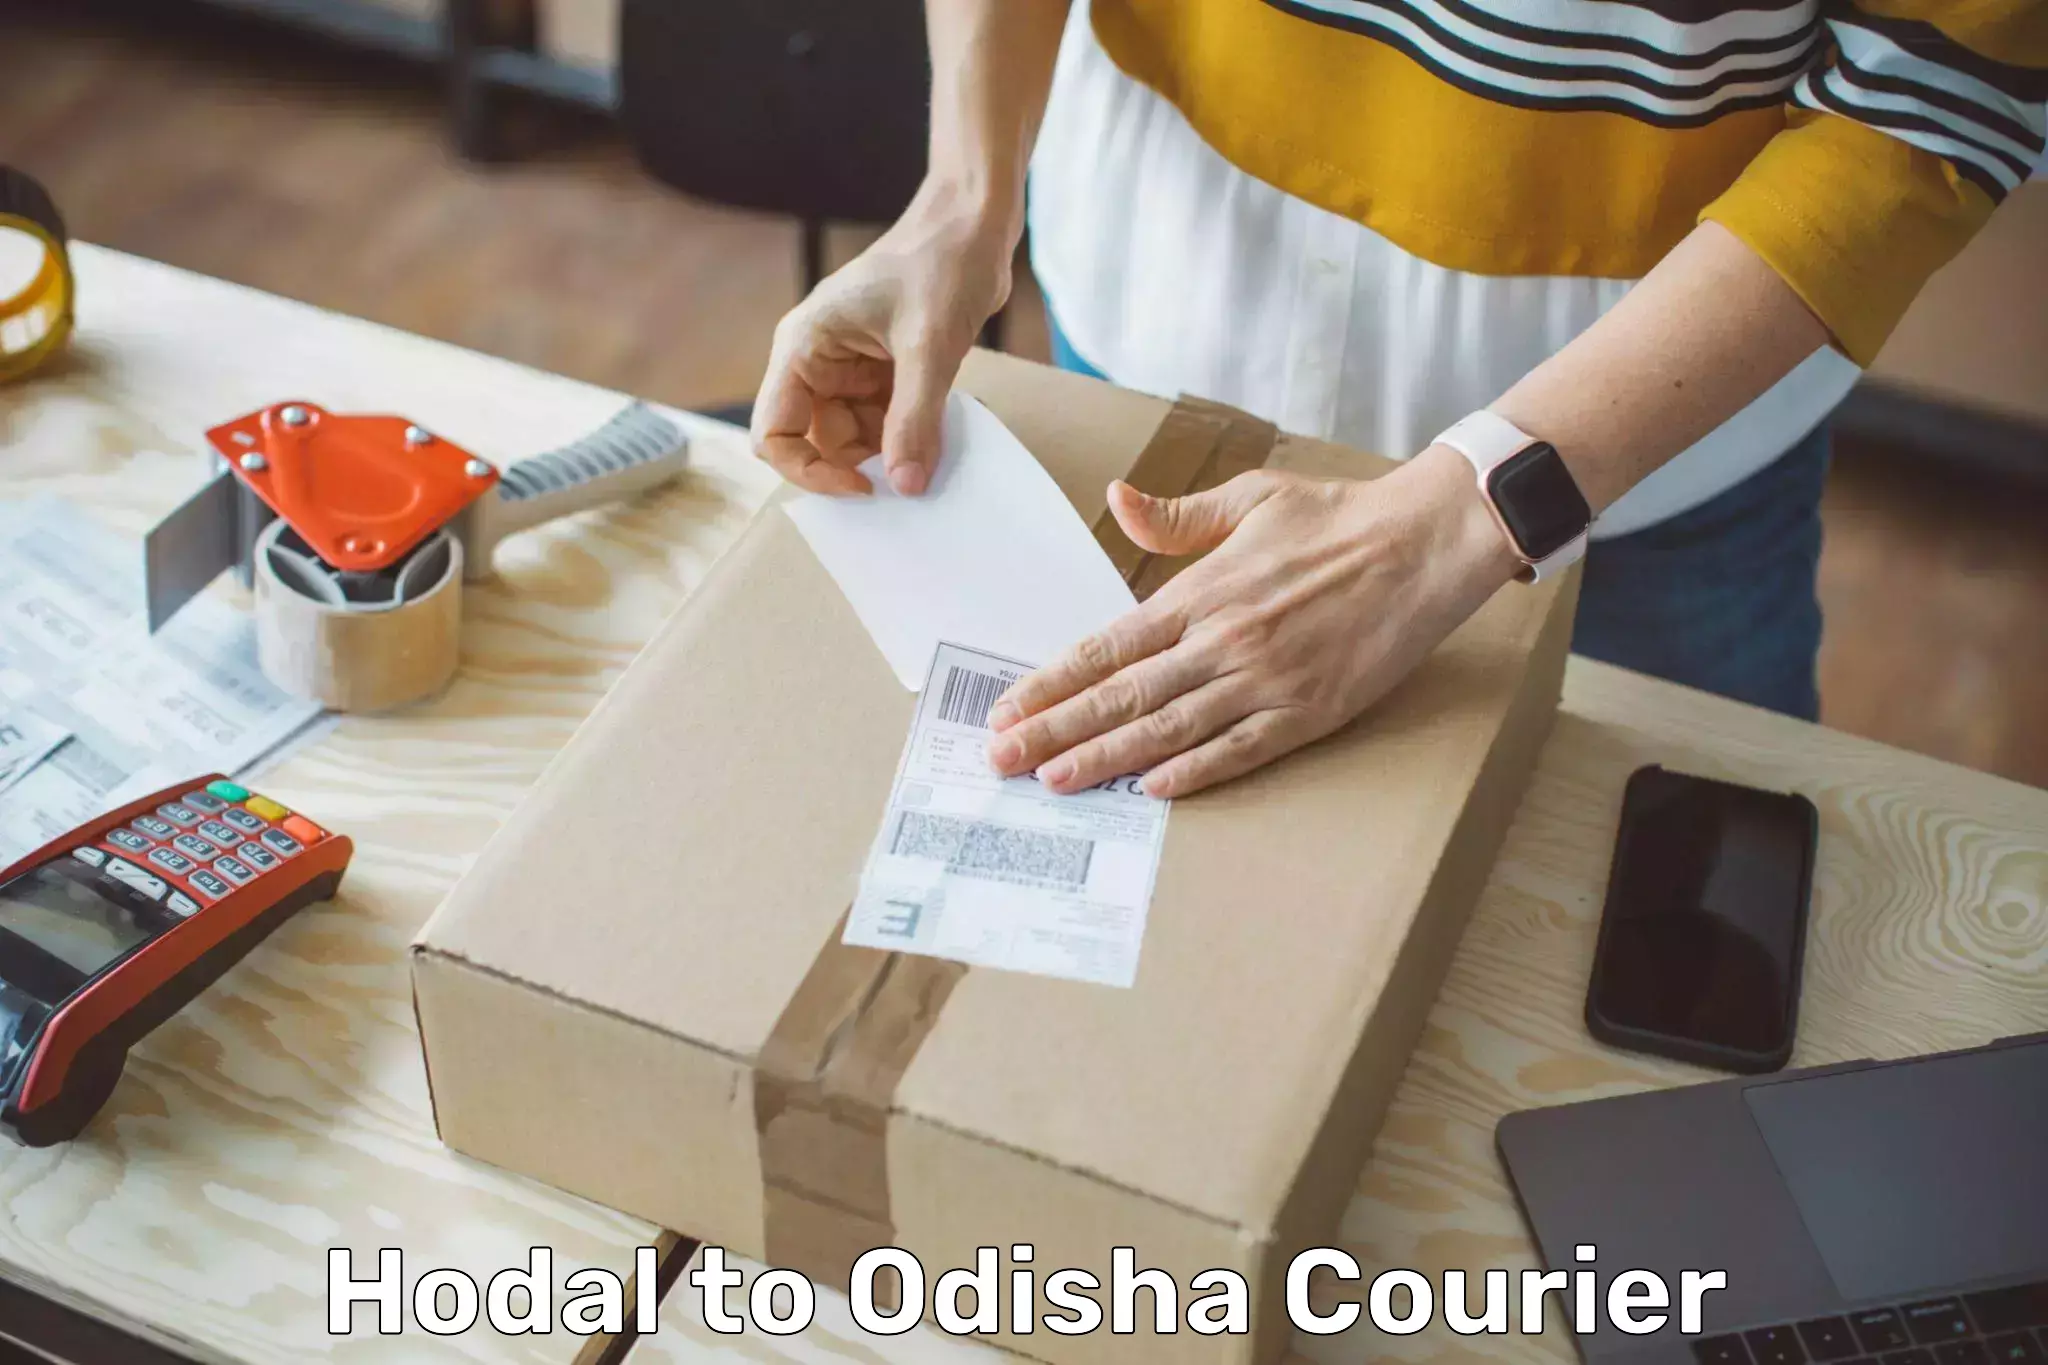 Multi-service courier options Hodal to Galleri